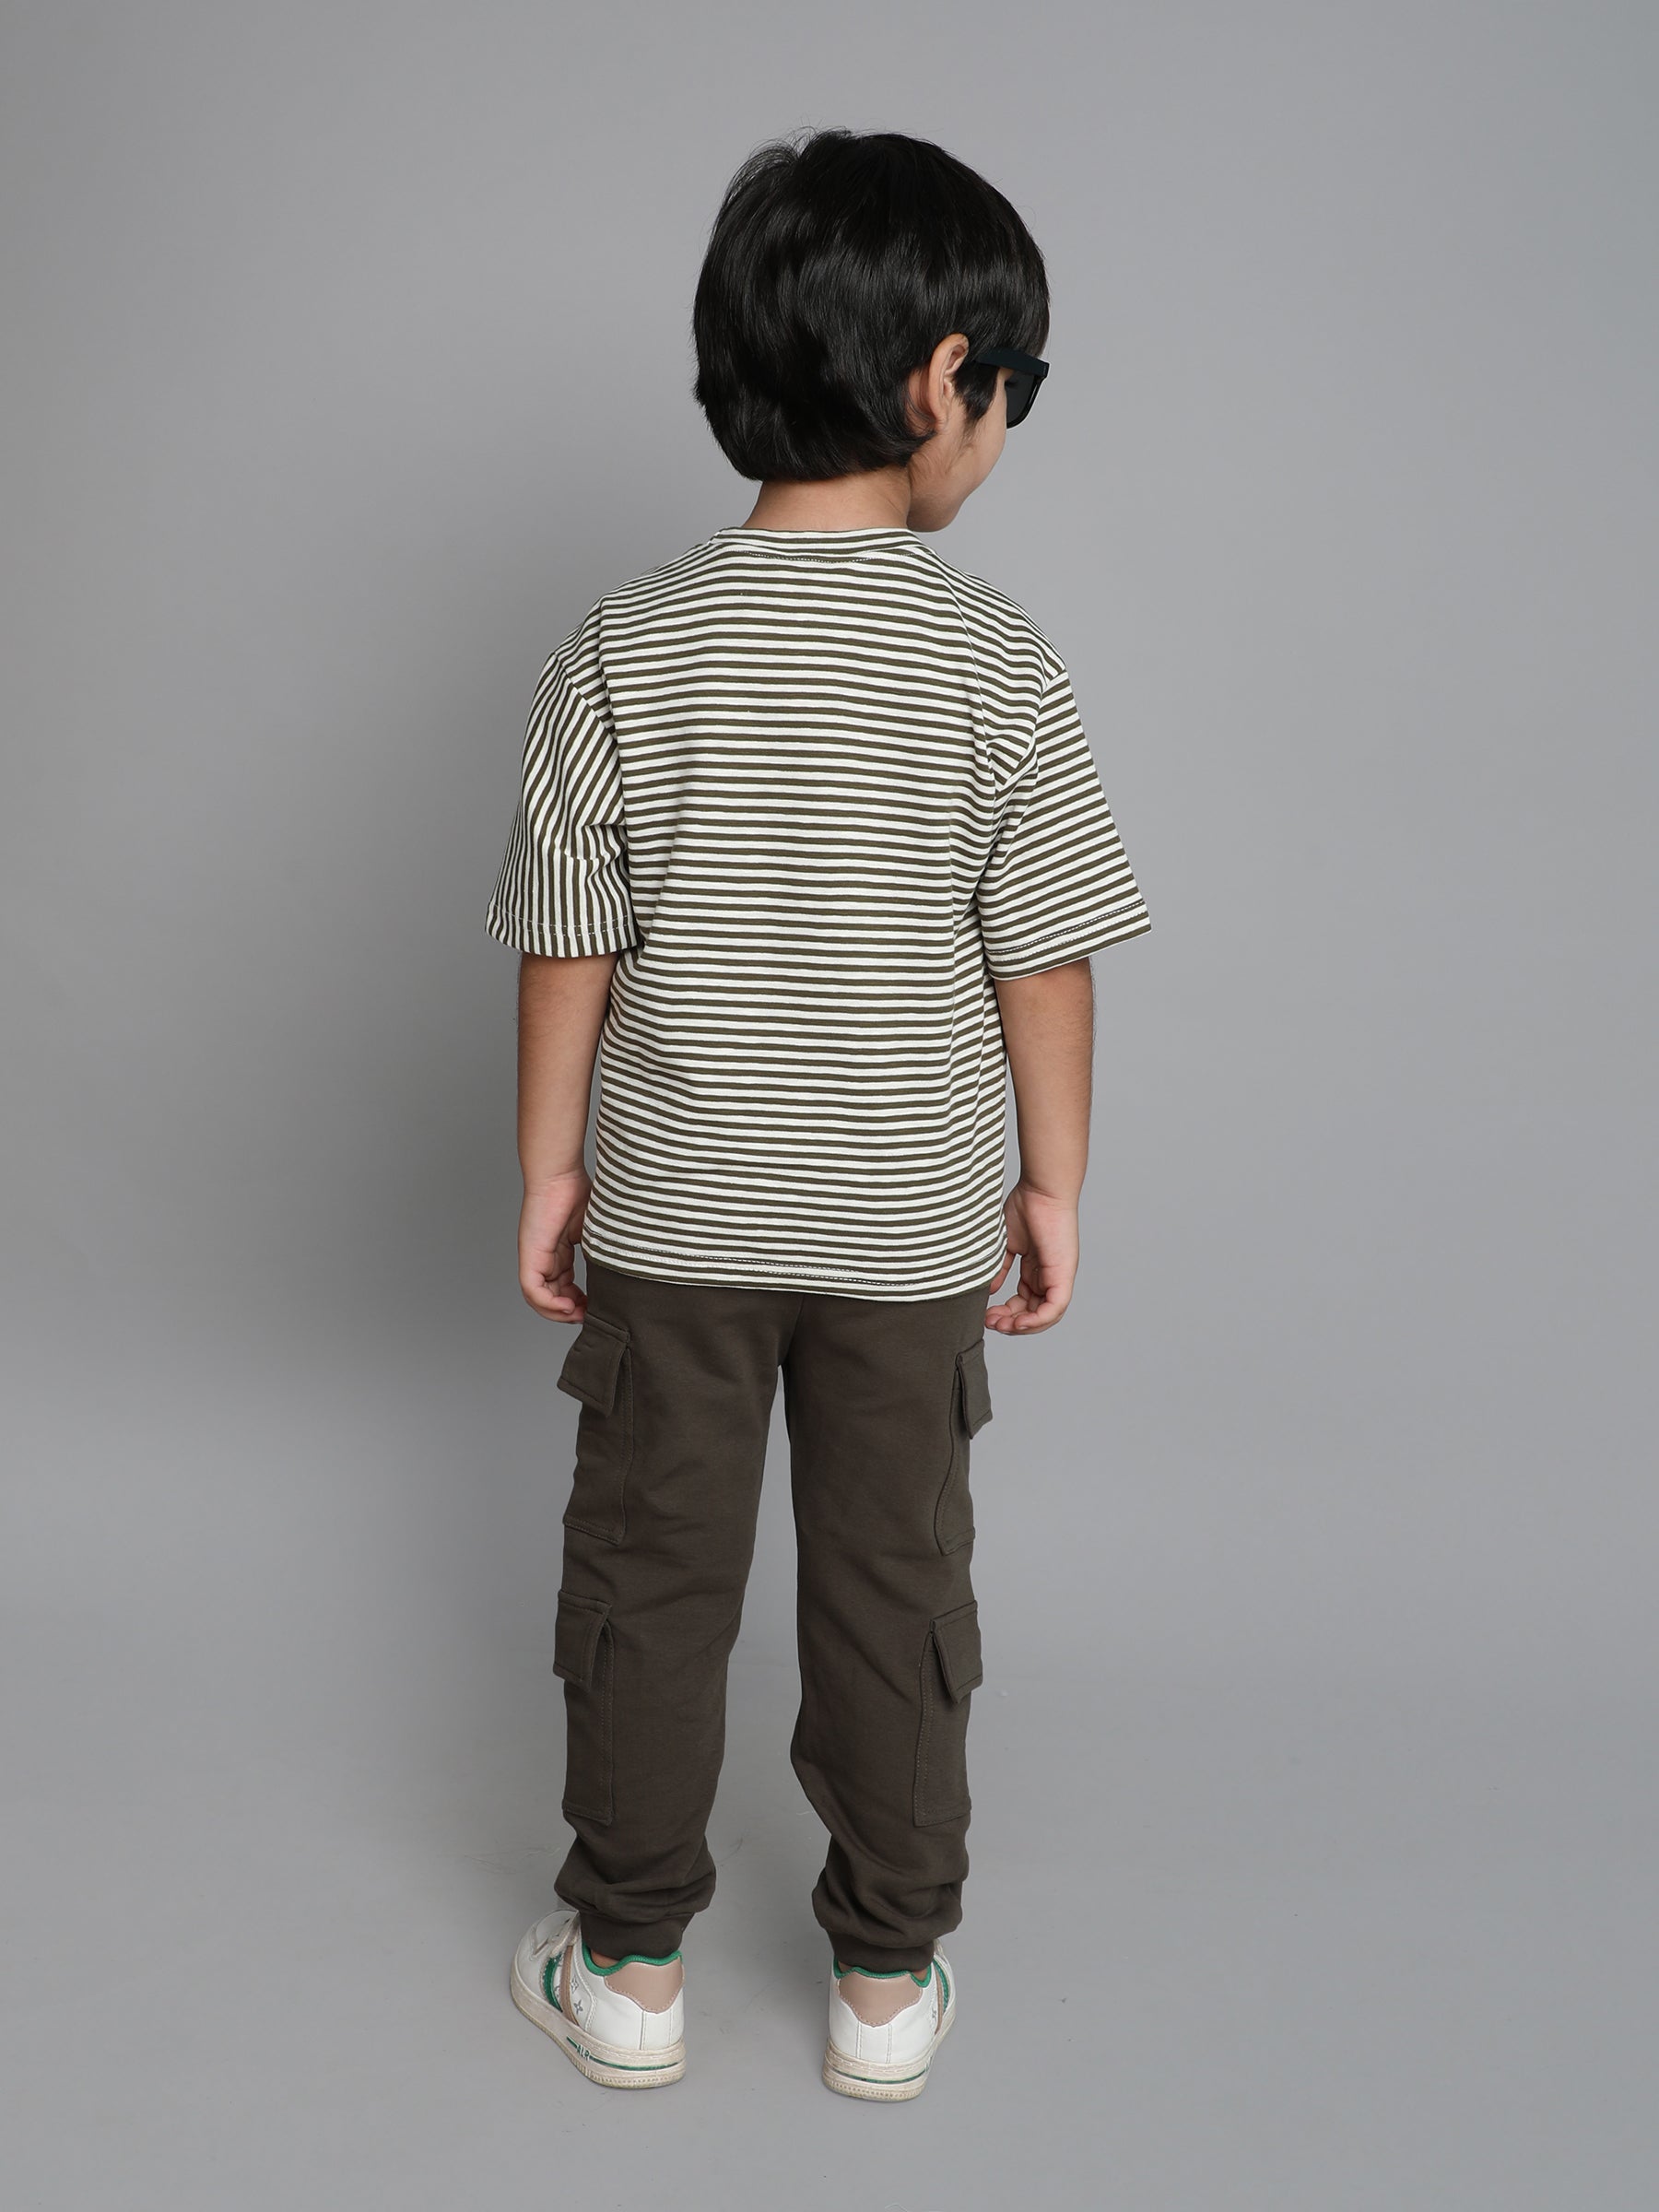 Yarn dyed stripes half sleeves Tee with Pocket detail cargo jogger pants set-Olive